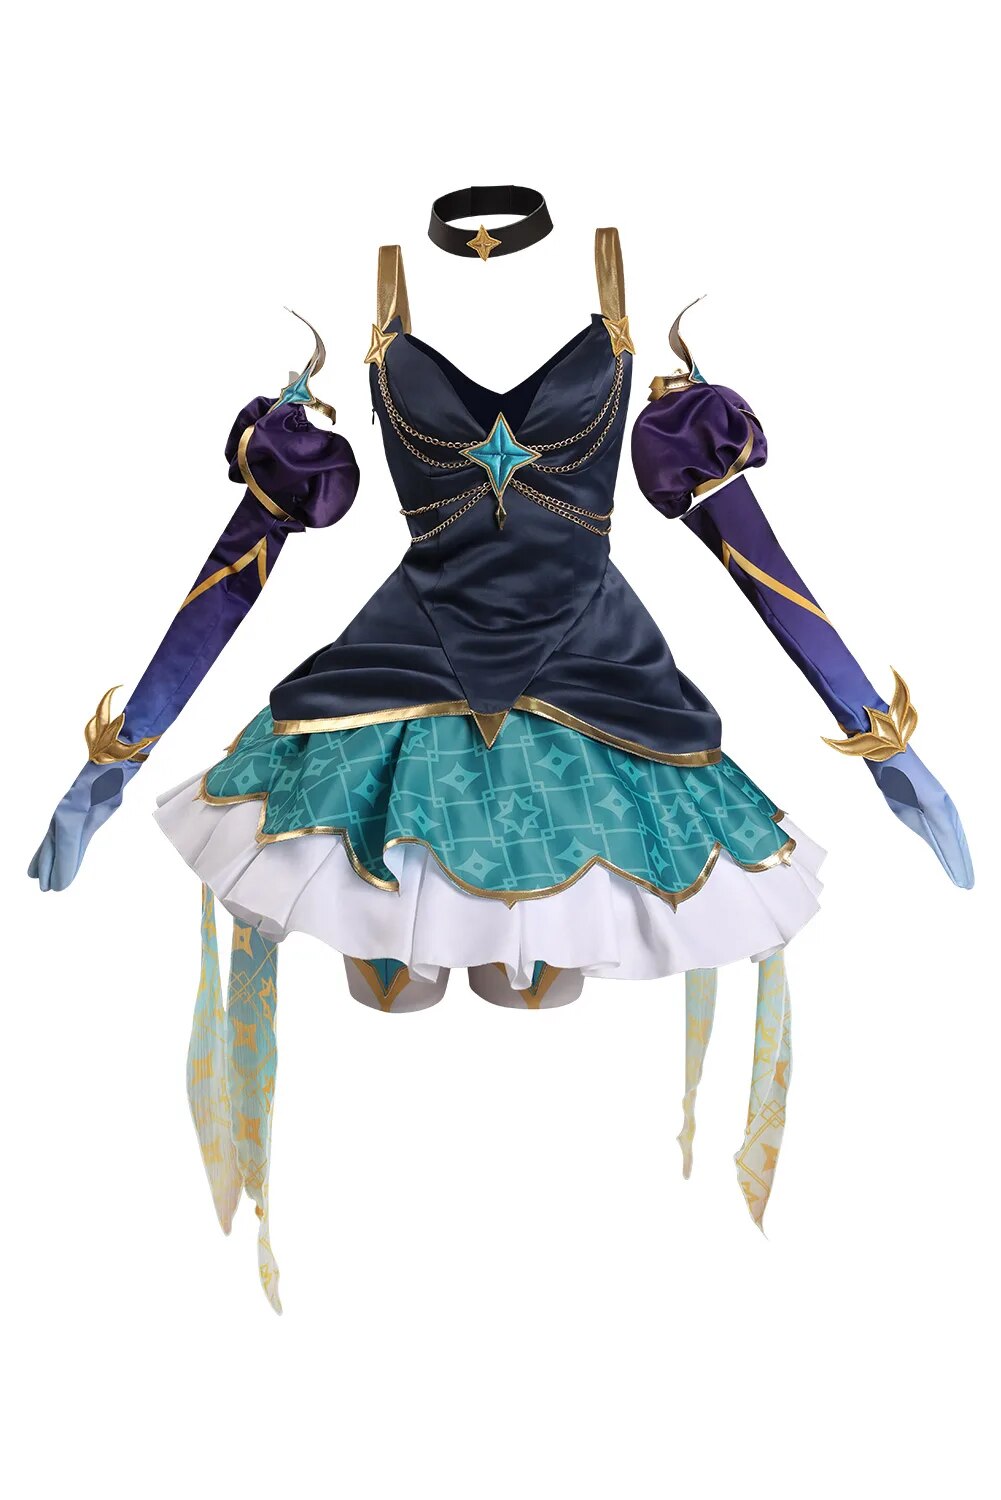 Cos Syndra Star Guardian Mythmaker Irelia Cosplay Anime Costume Dress Outfits Fantasitc Skirts Halloween Carnival Party Suit